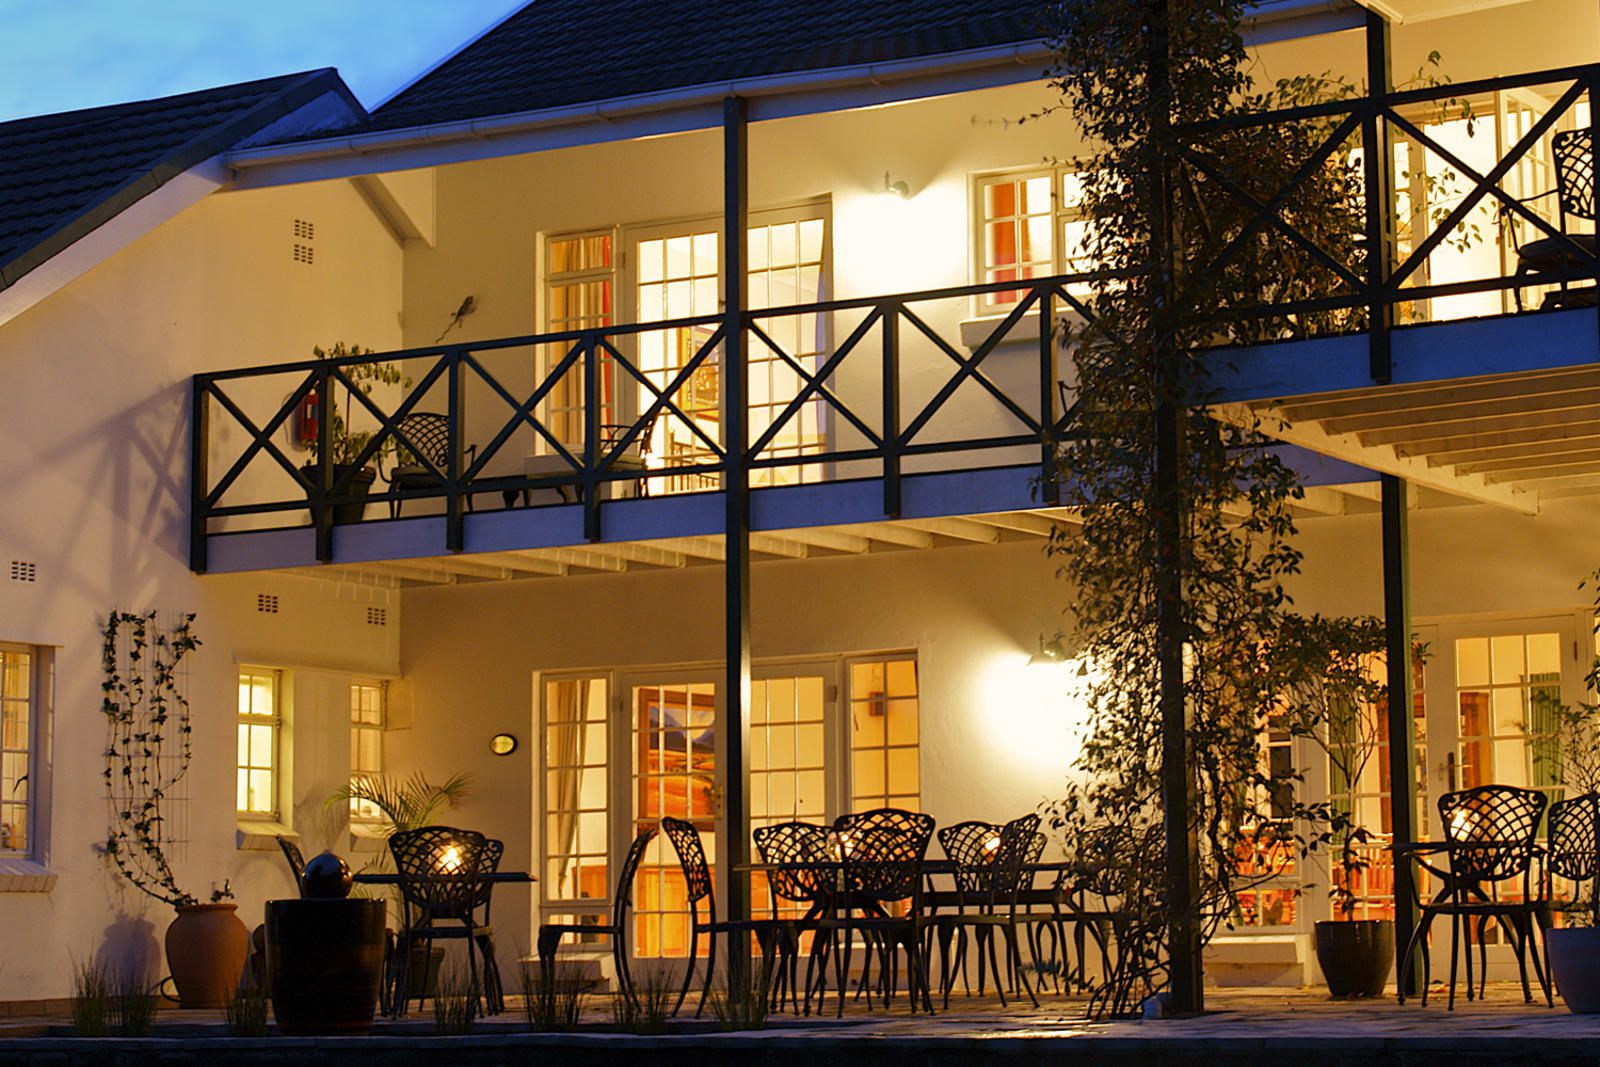 Golden Hill Guest House Golden Hill Somerset West Western Cape South Africa House, Building, Architecture